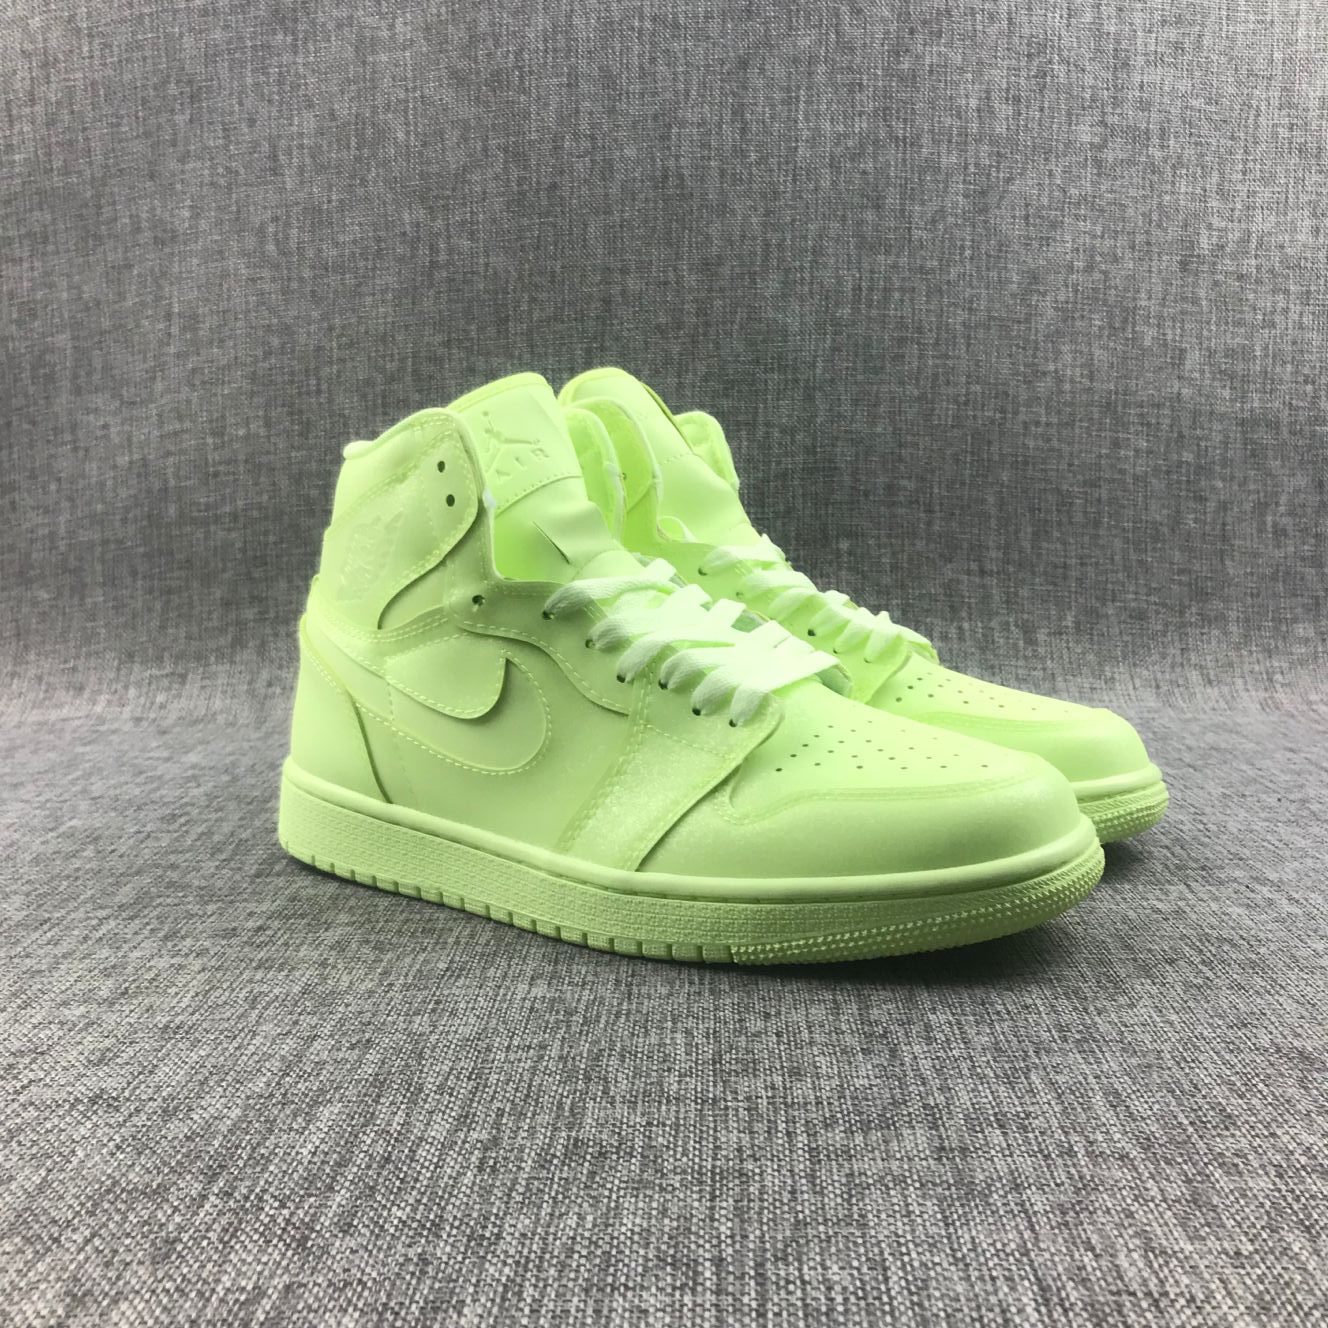 New Air Jordan 1GS Mid Fluorscent Green Shoes - Click Image to Close